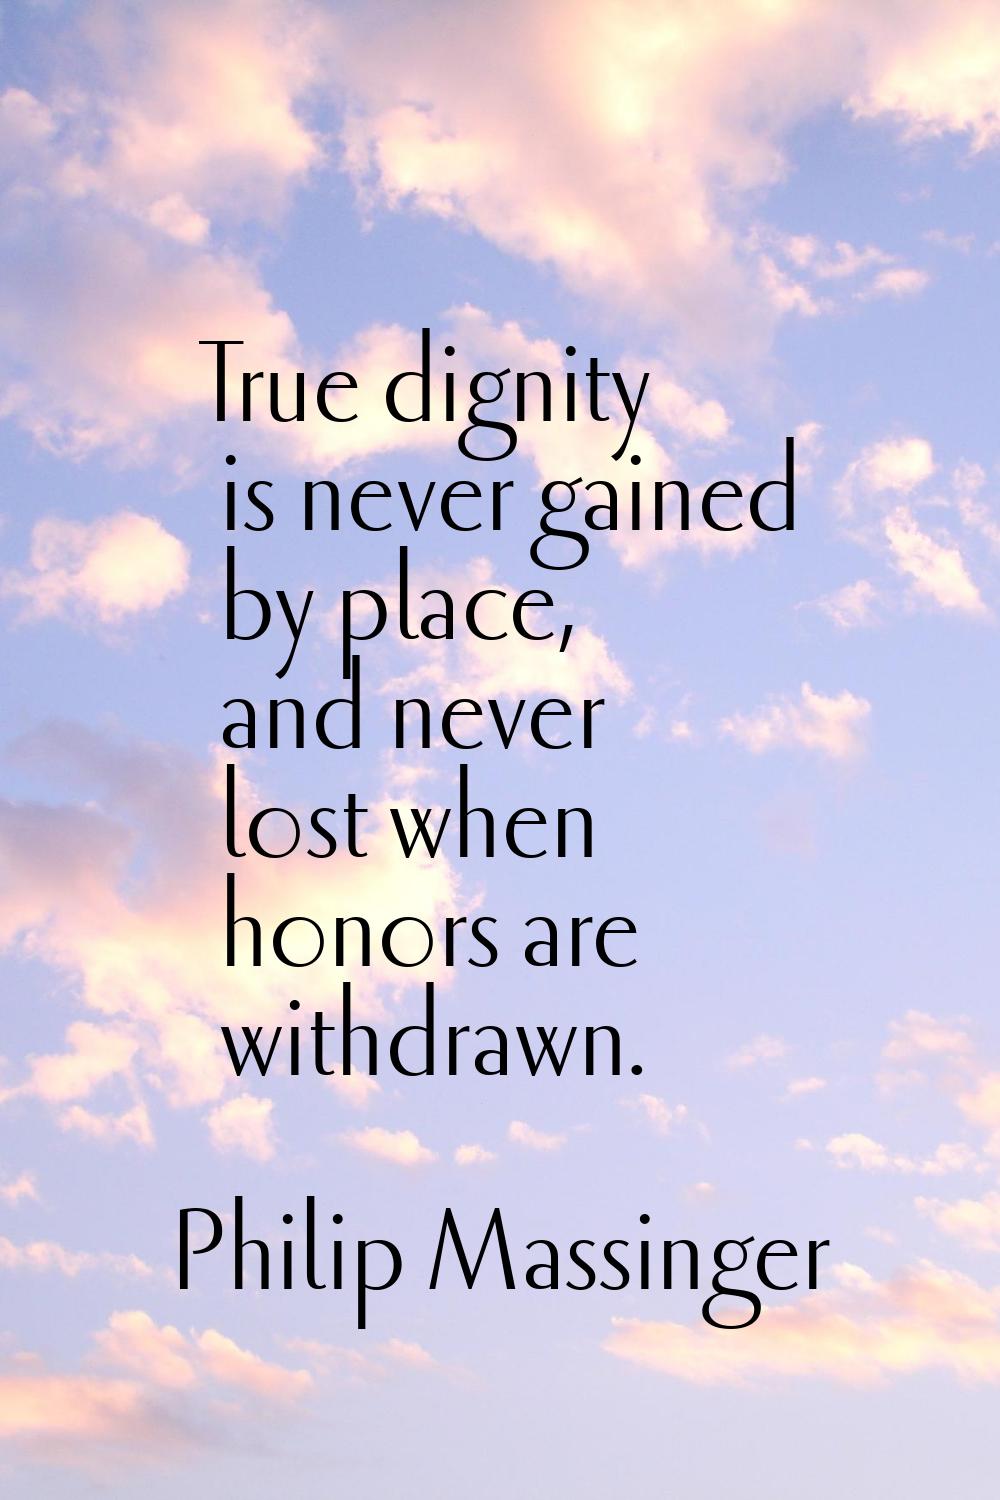 True dignity is never gained by place, and never lost when honors are withdrawn.